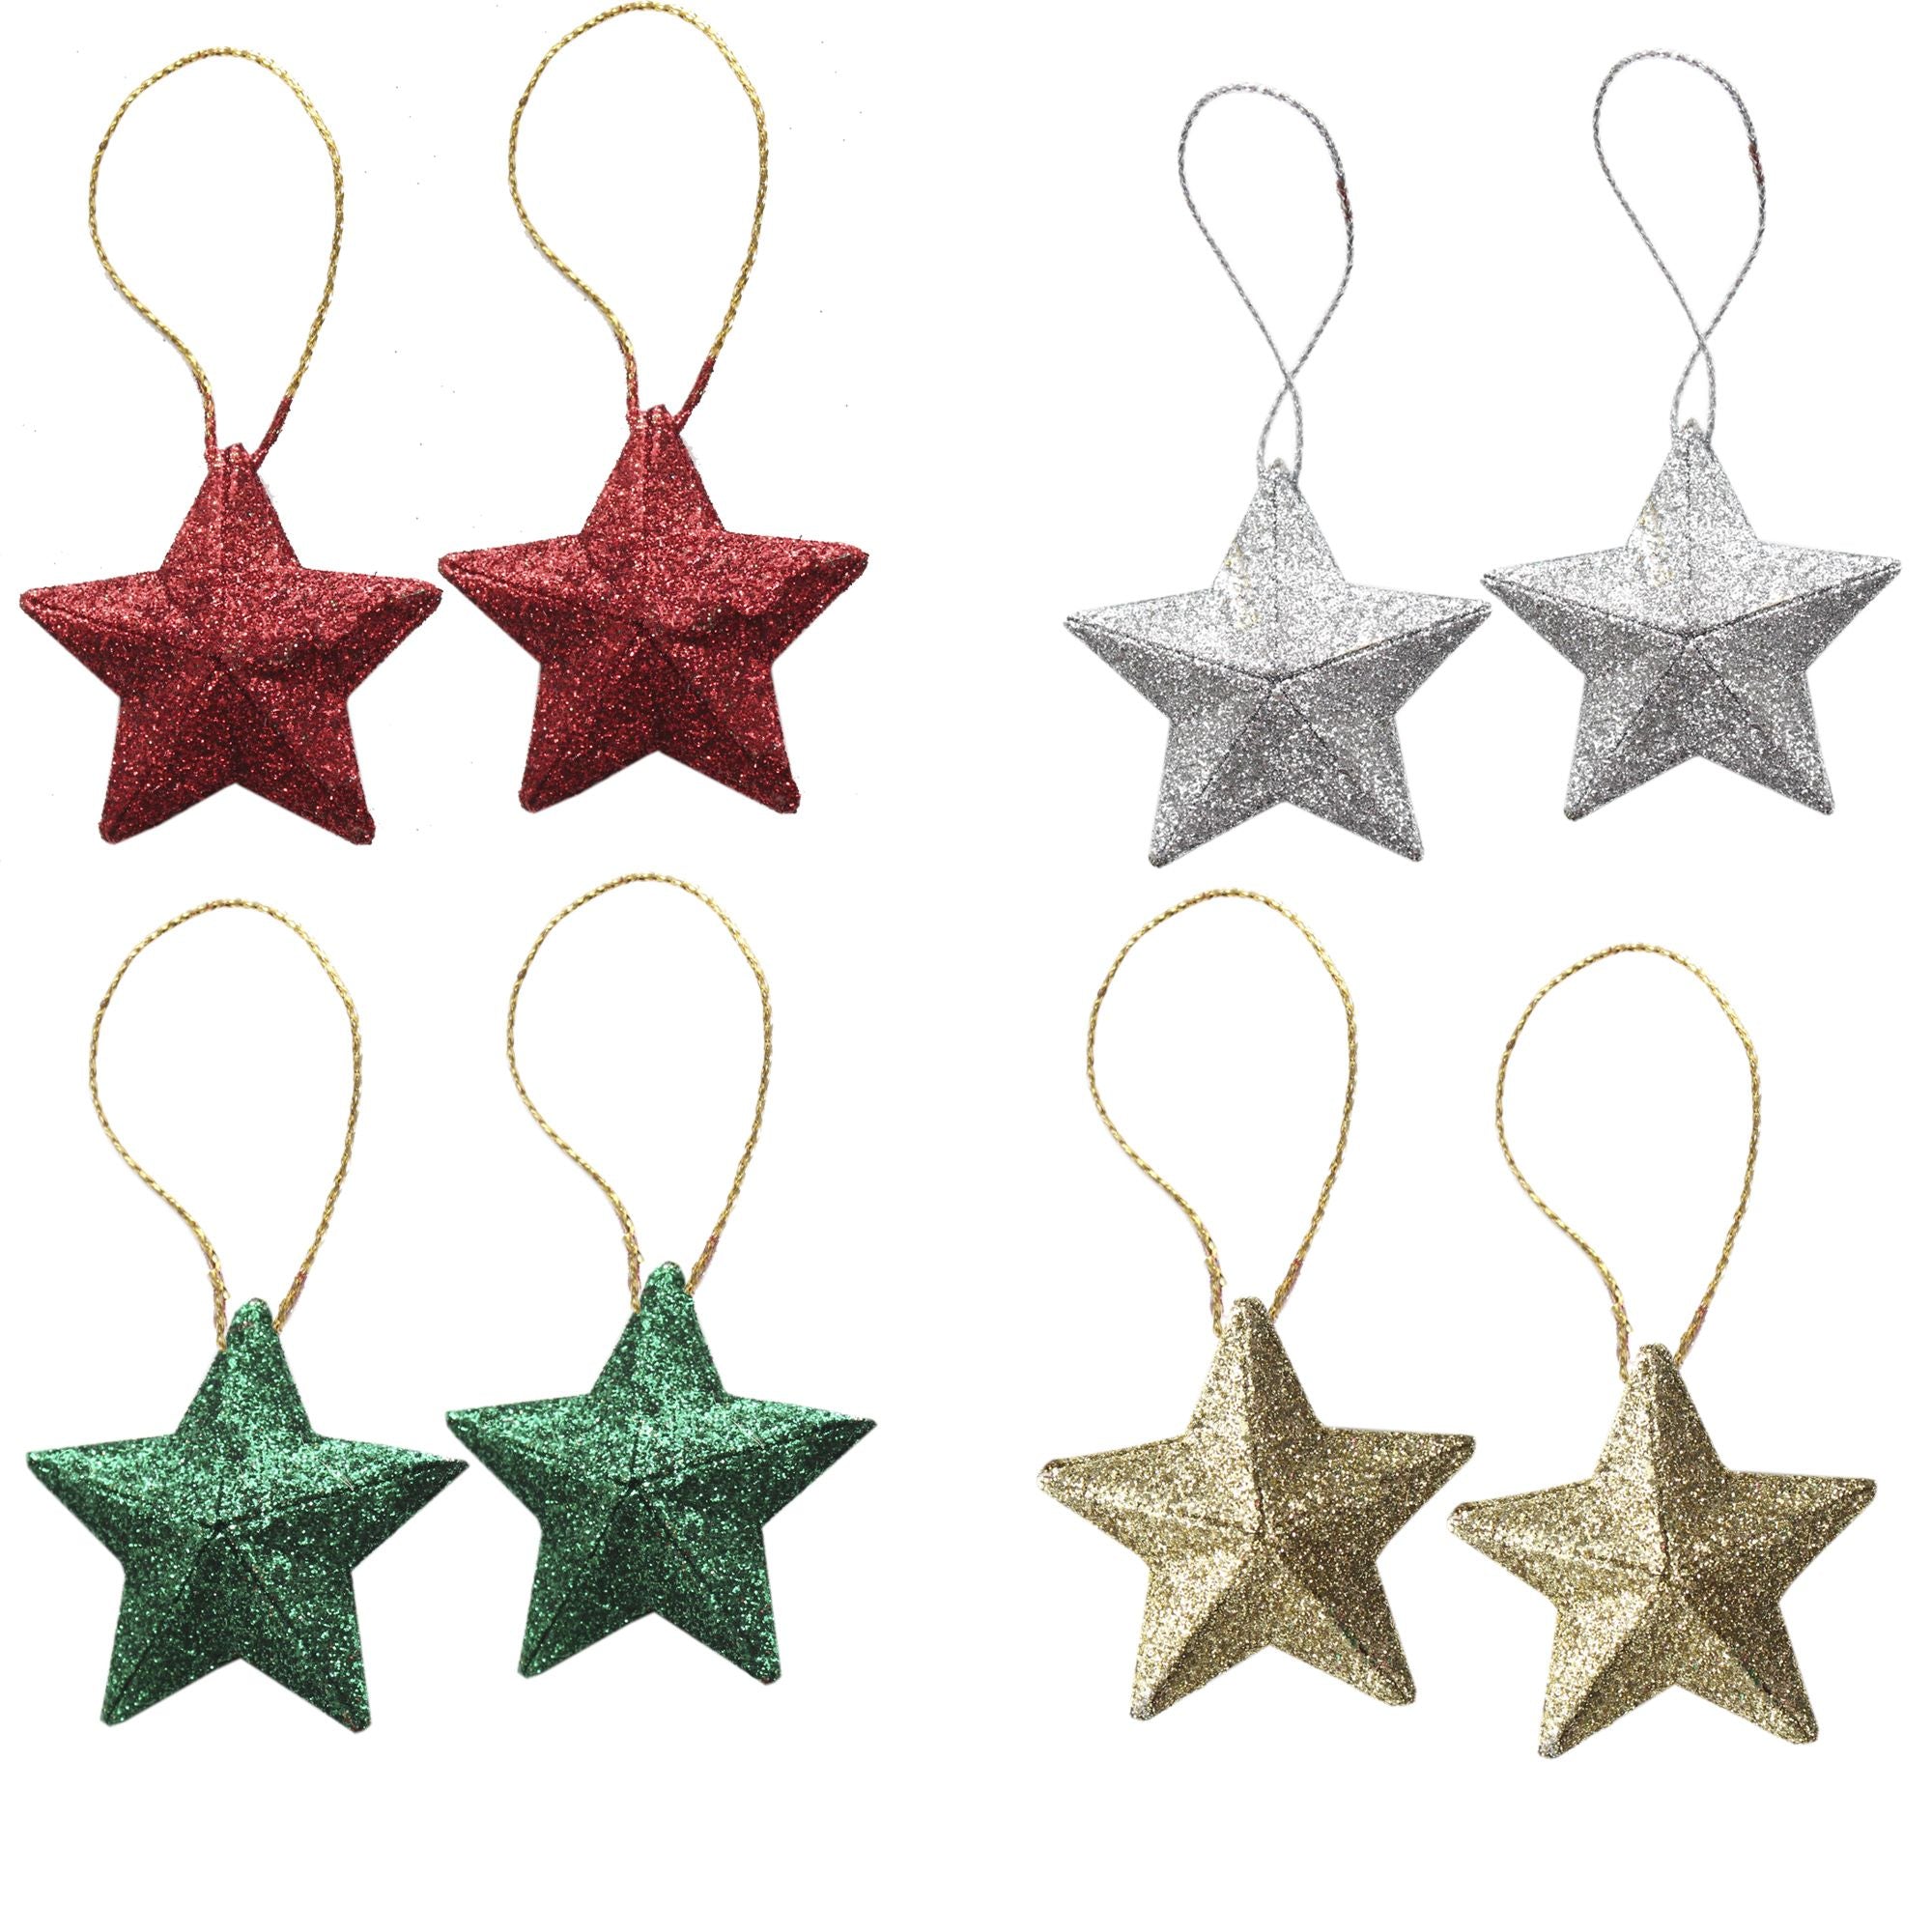 Handmade Christmas Ornaments - 3D Glitter Stars, 2inch, Assorted Colours - Gold, Red, Green, Silver, 8pc